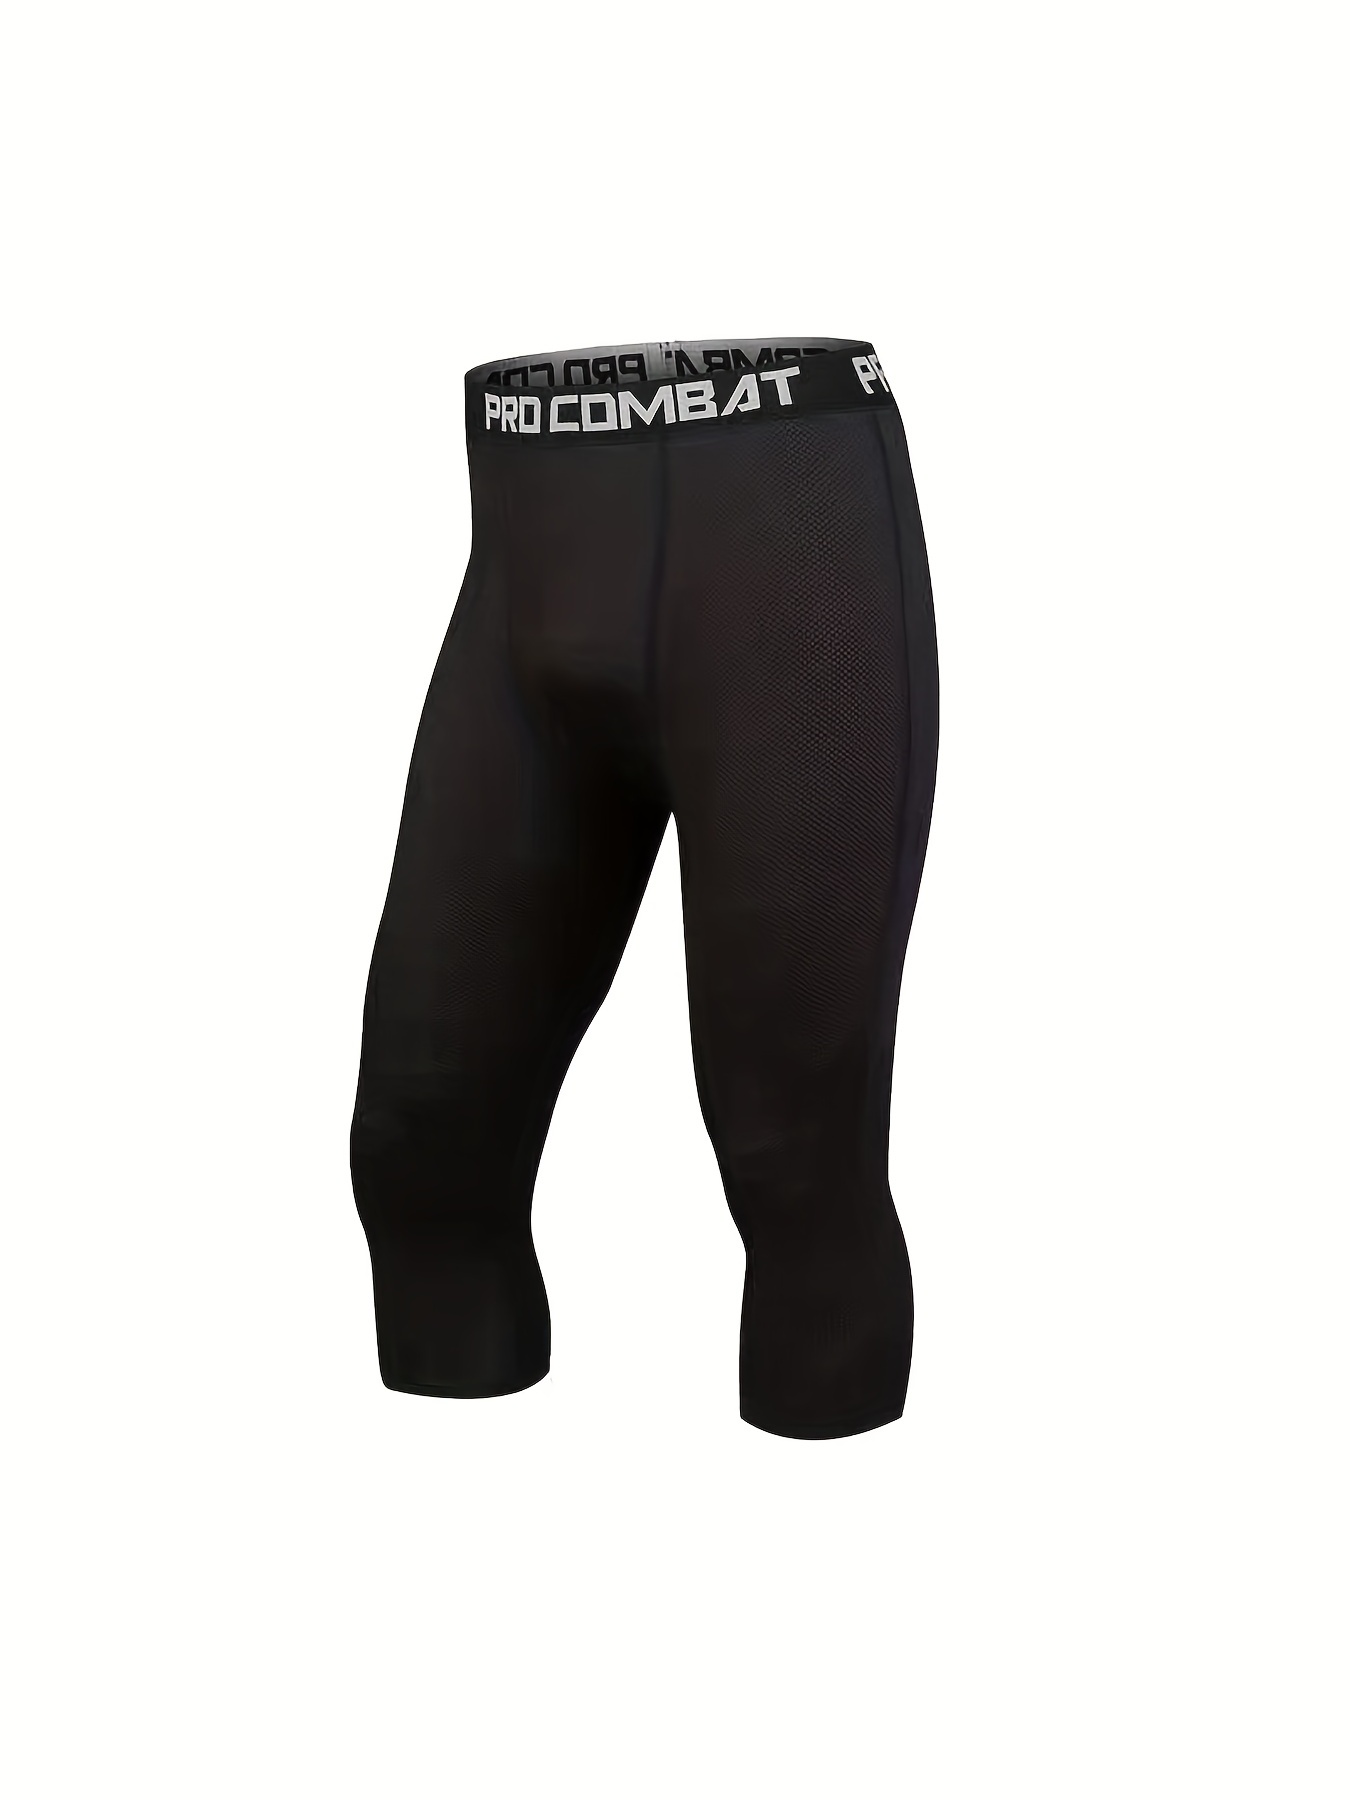 Pocket Compression Pants For Sports Basketball Training, 3/4